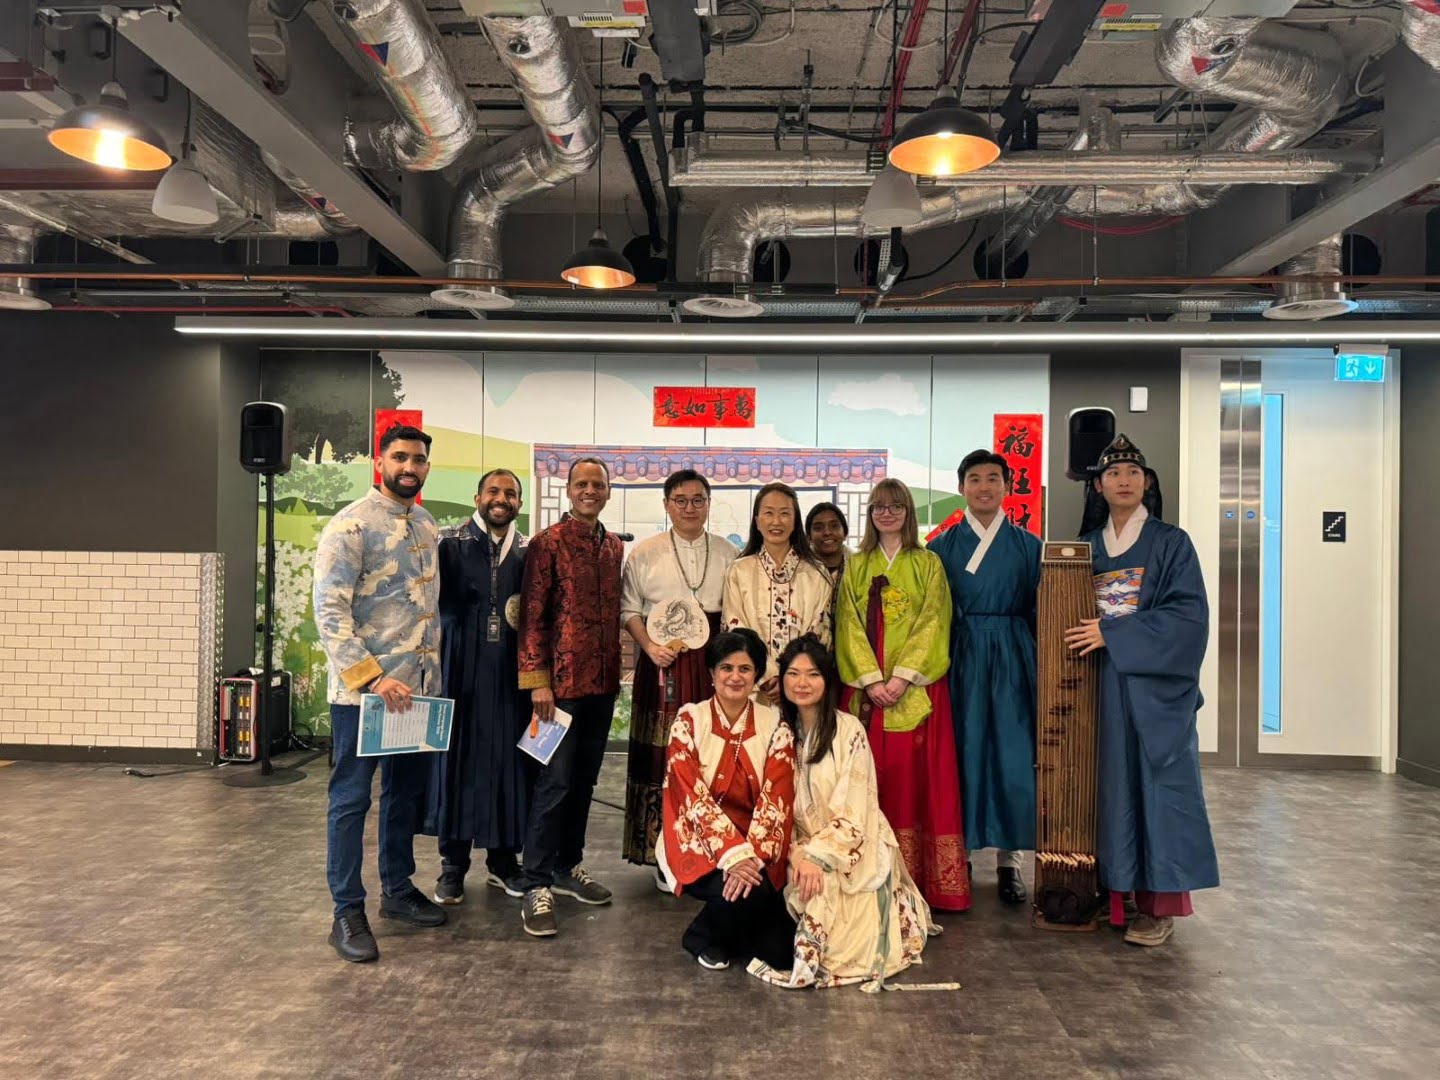 A diverse group of people pose together indoors. They wear traditional clothing, likely representing different cultures, against a modern, industrial background.